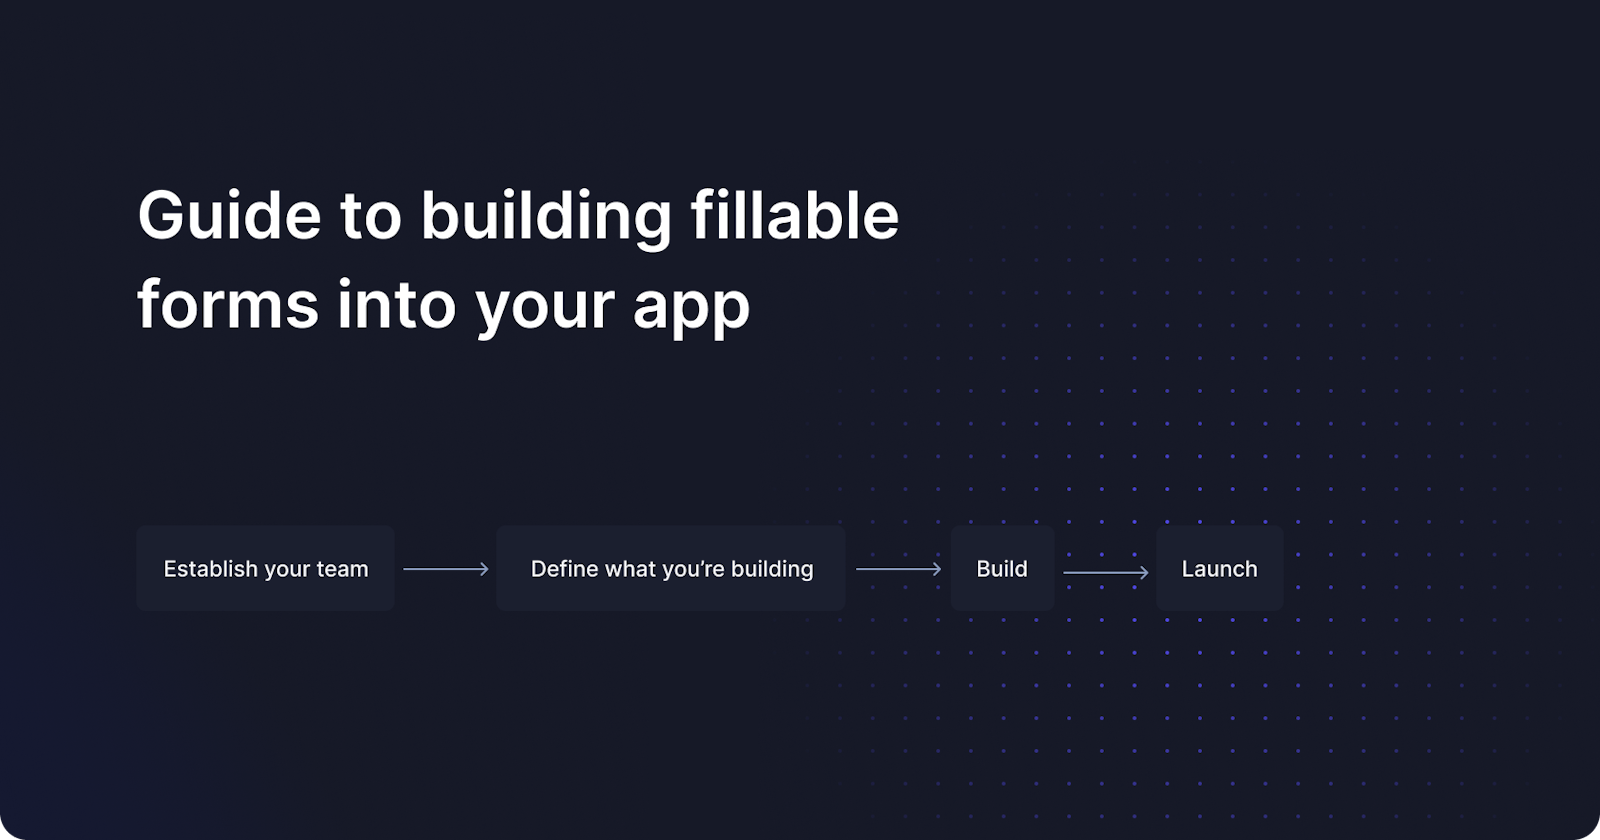 Guide to building fillable forms into your app